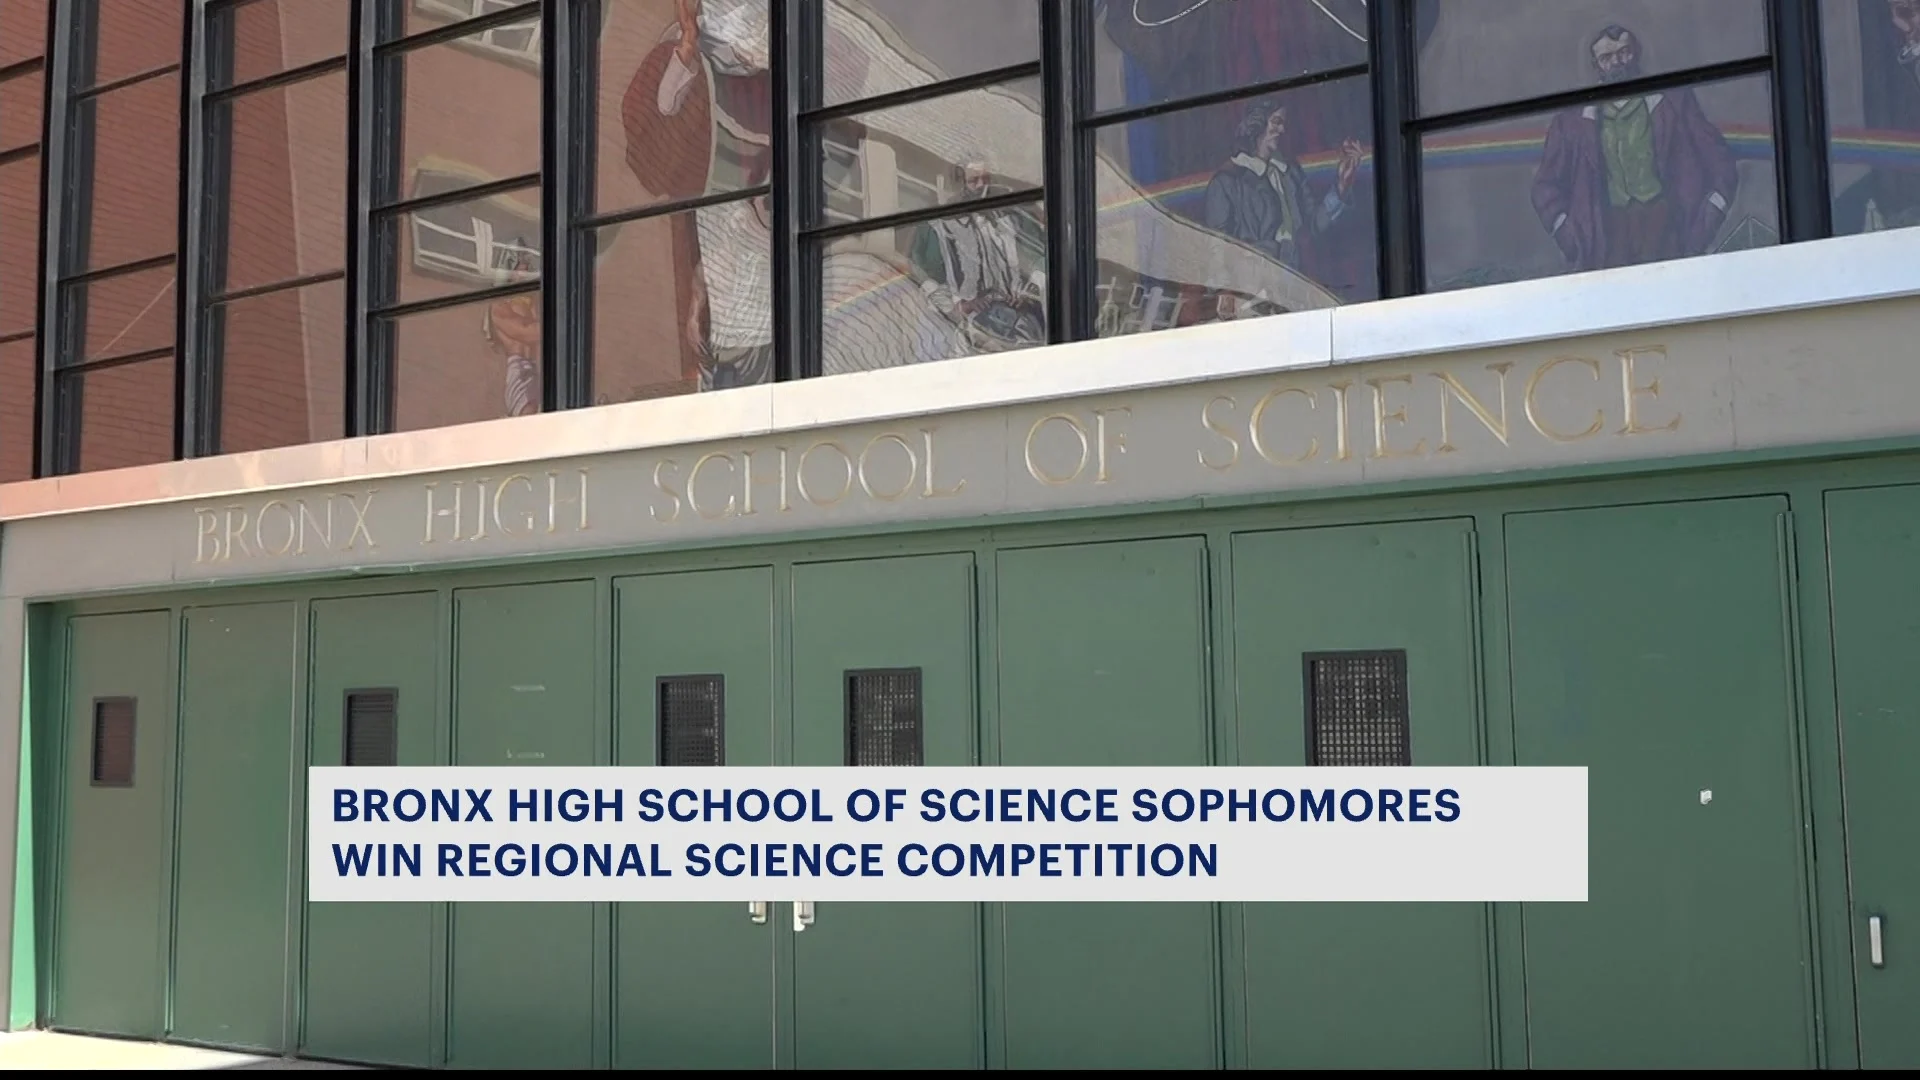 Regional Science Competition crowns Bronx High School of Science trio as champions